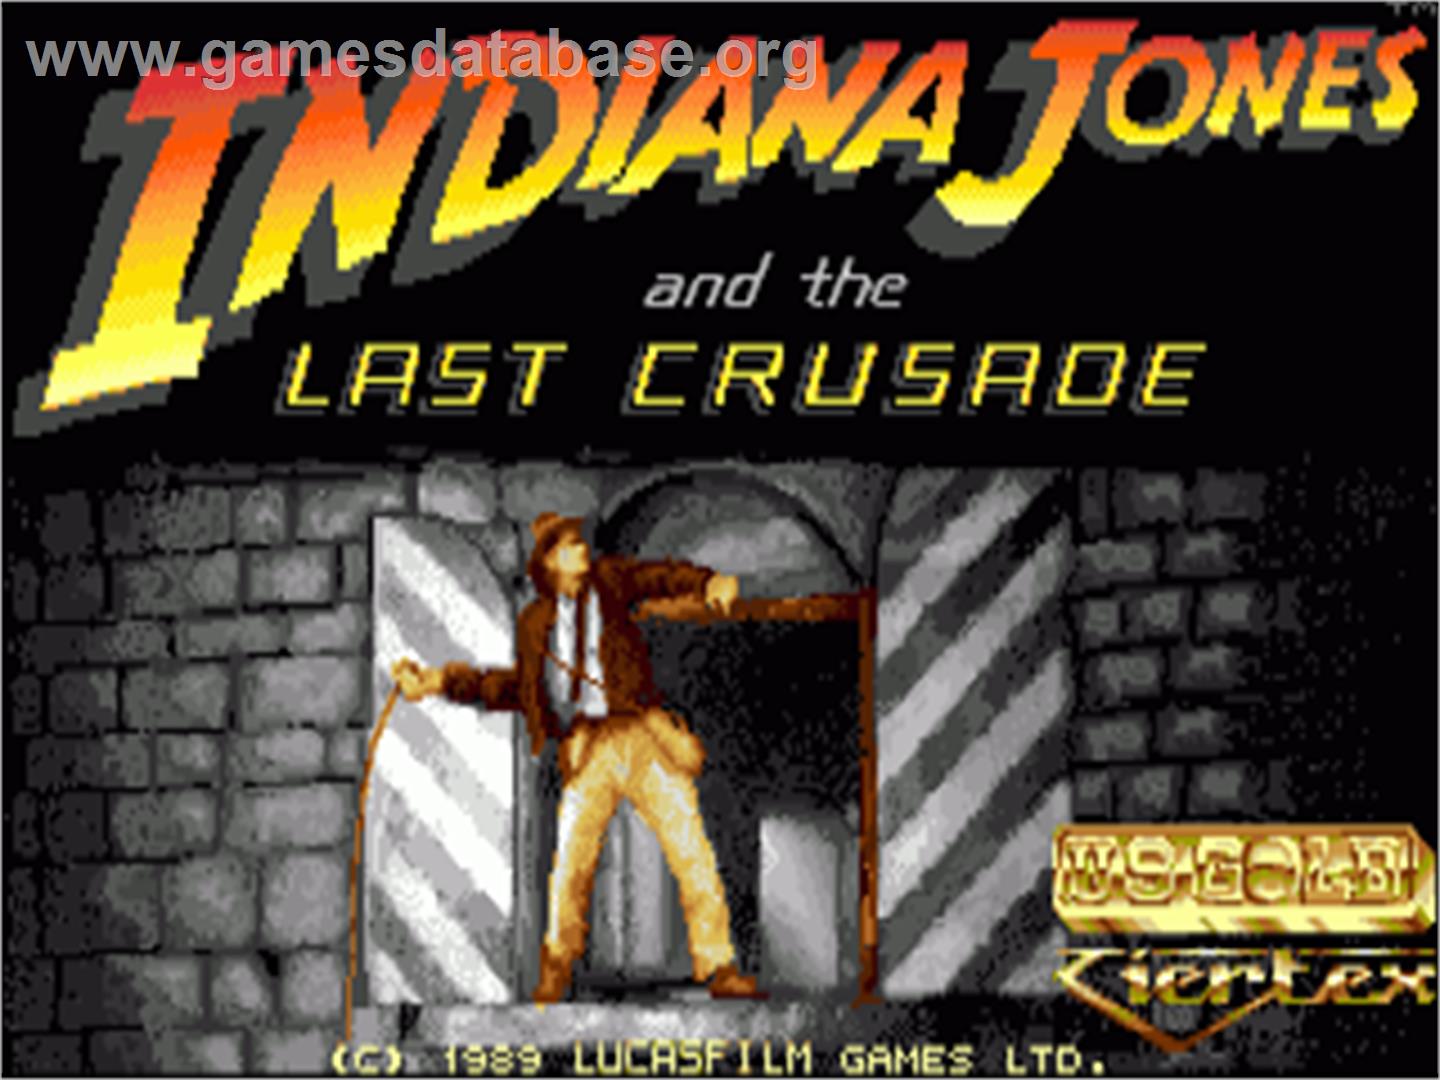 Indiana Jones and the Last Crusade: The Action Game - Commodore Amiga - Artwork - Title Screen